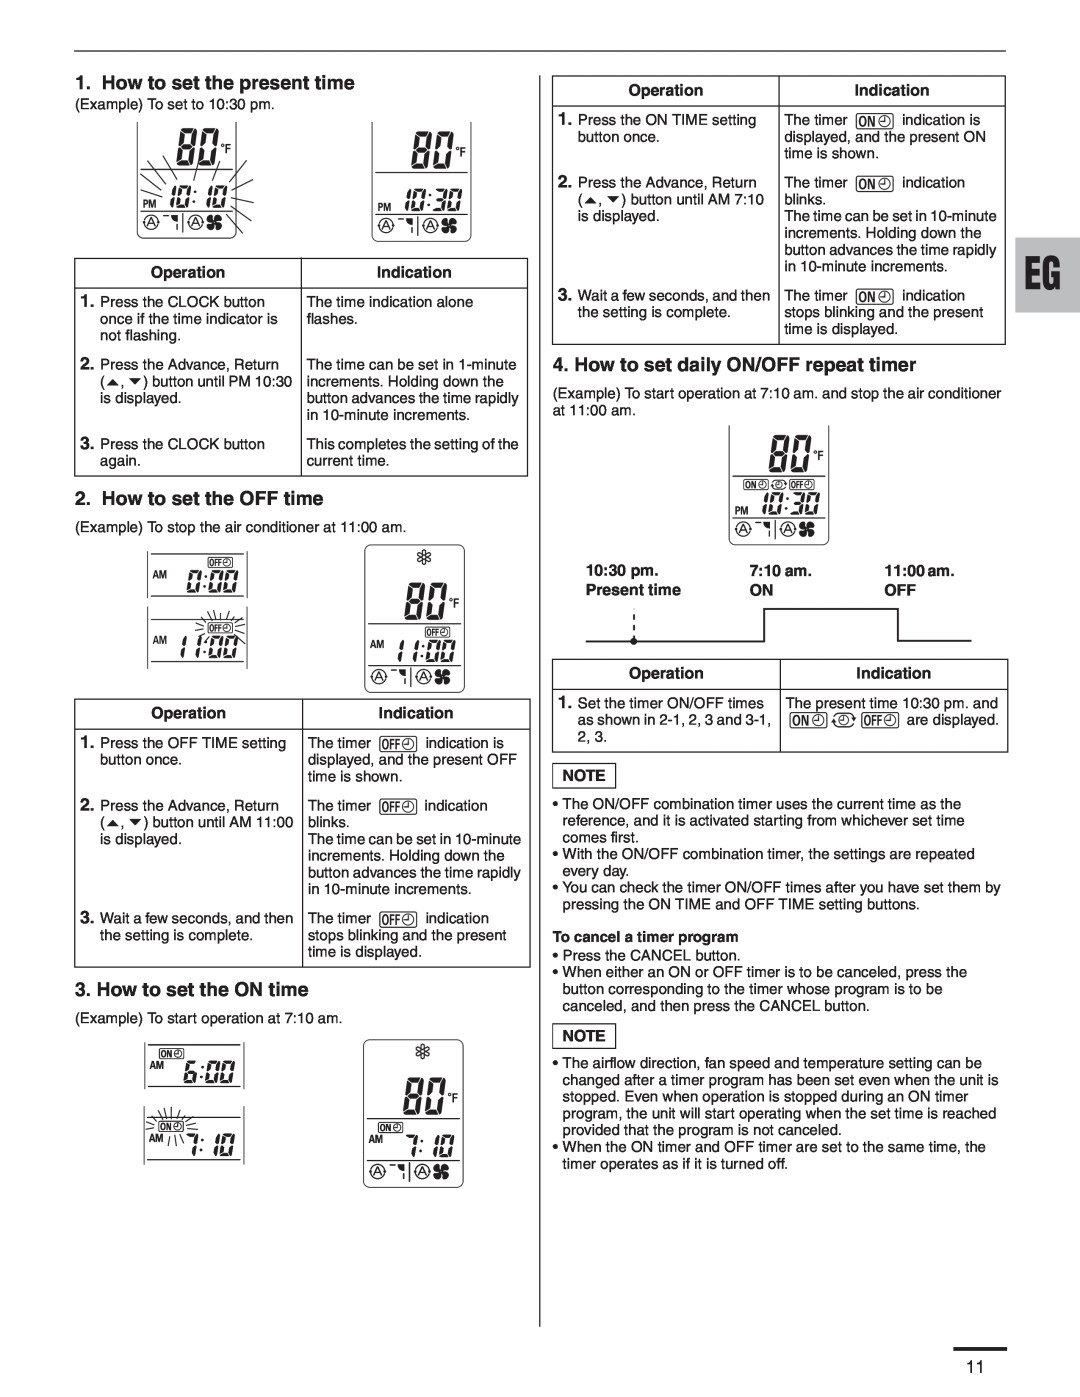 Panasonic R410A service manual How to set the present time, How to set the OFF time, How to set the ON time 